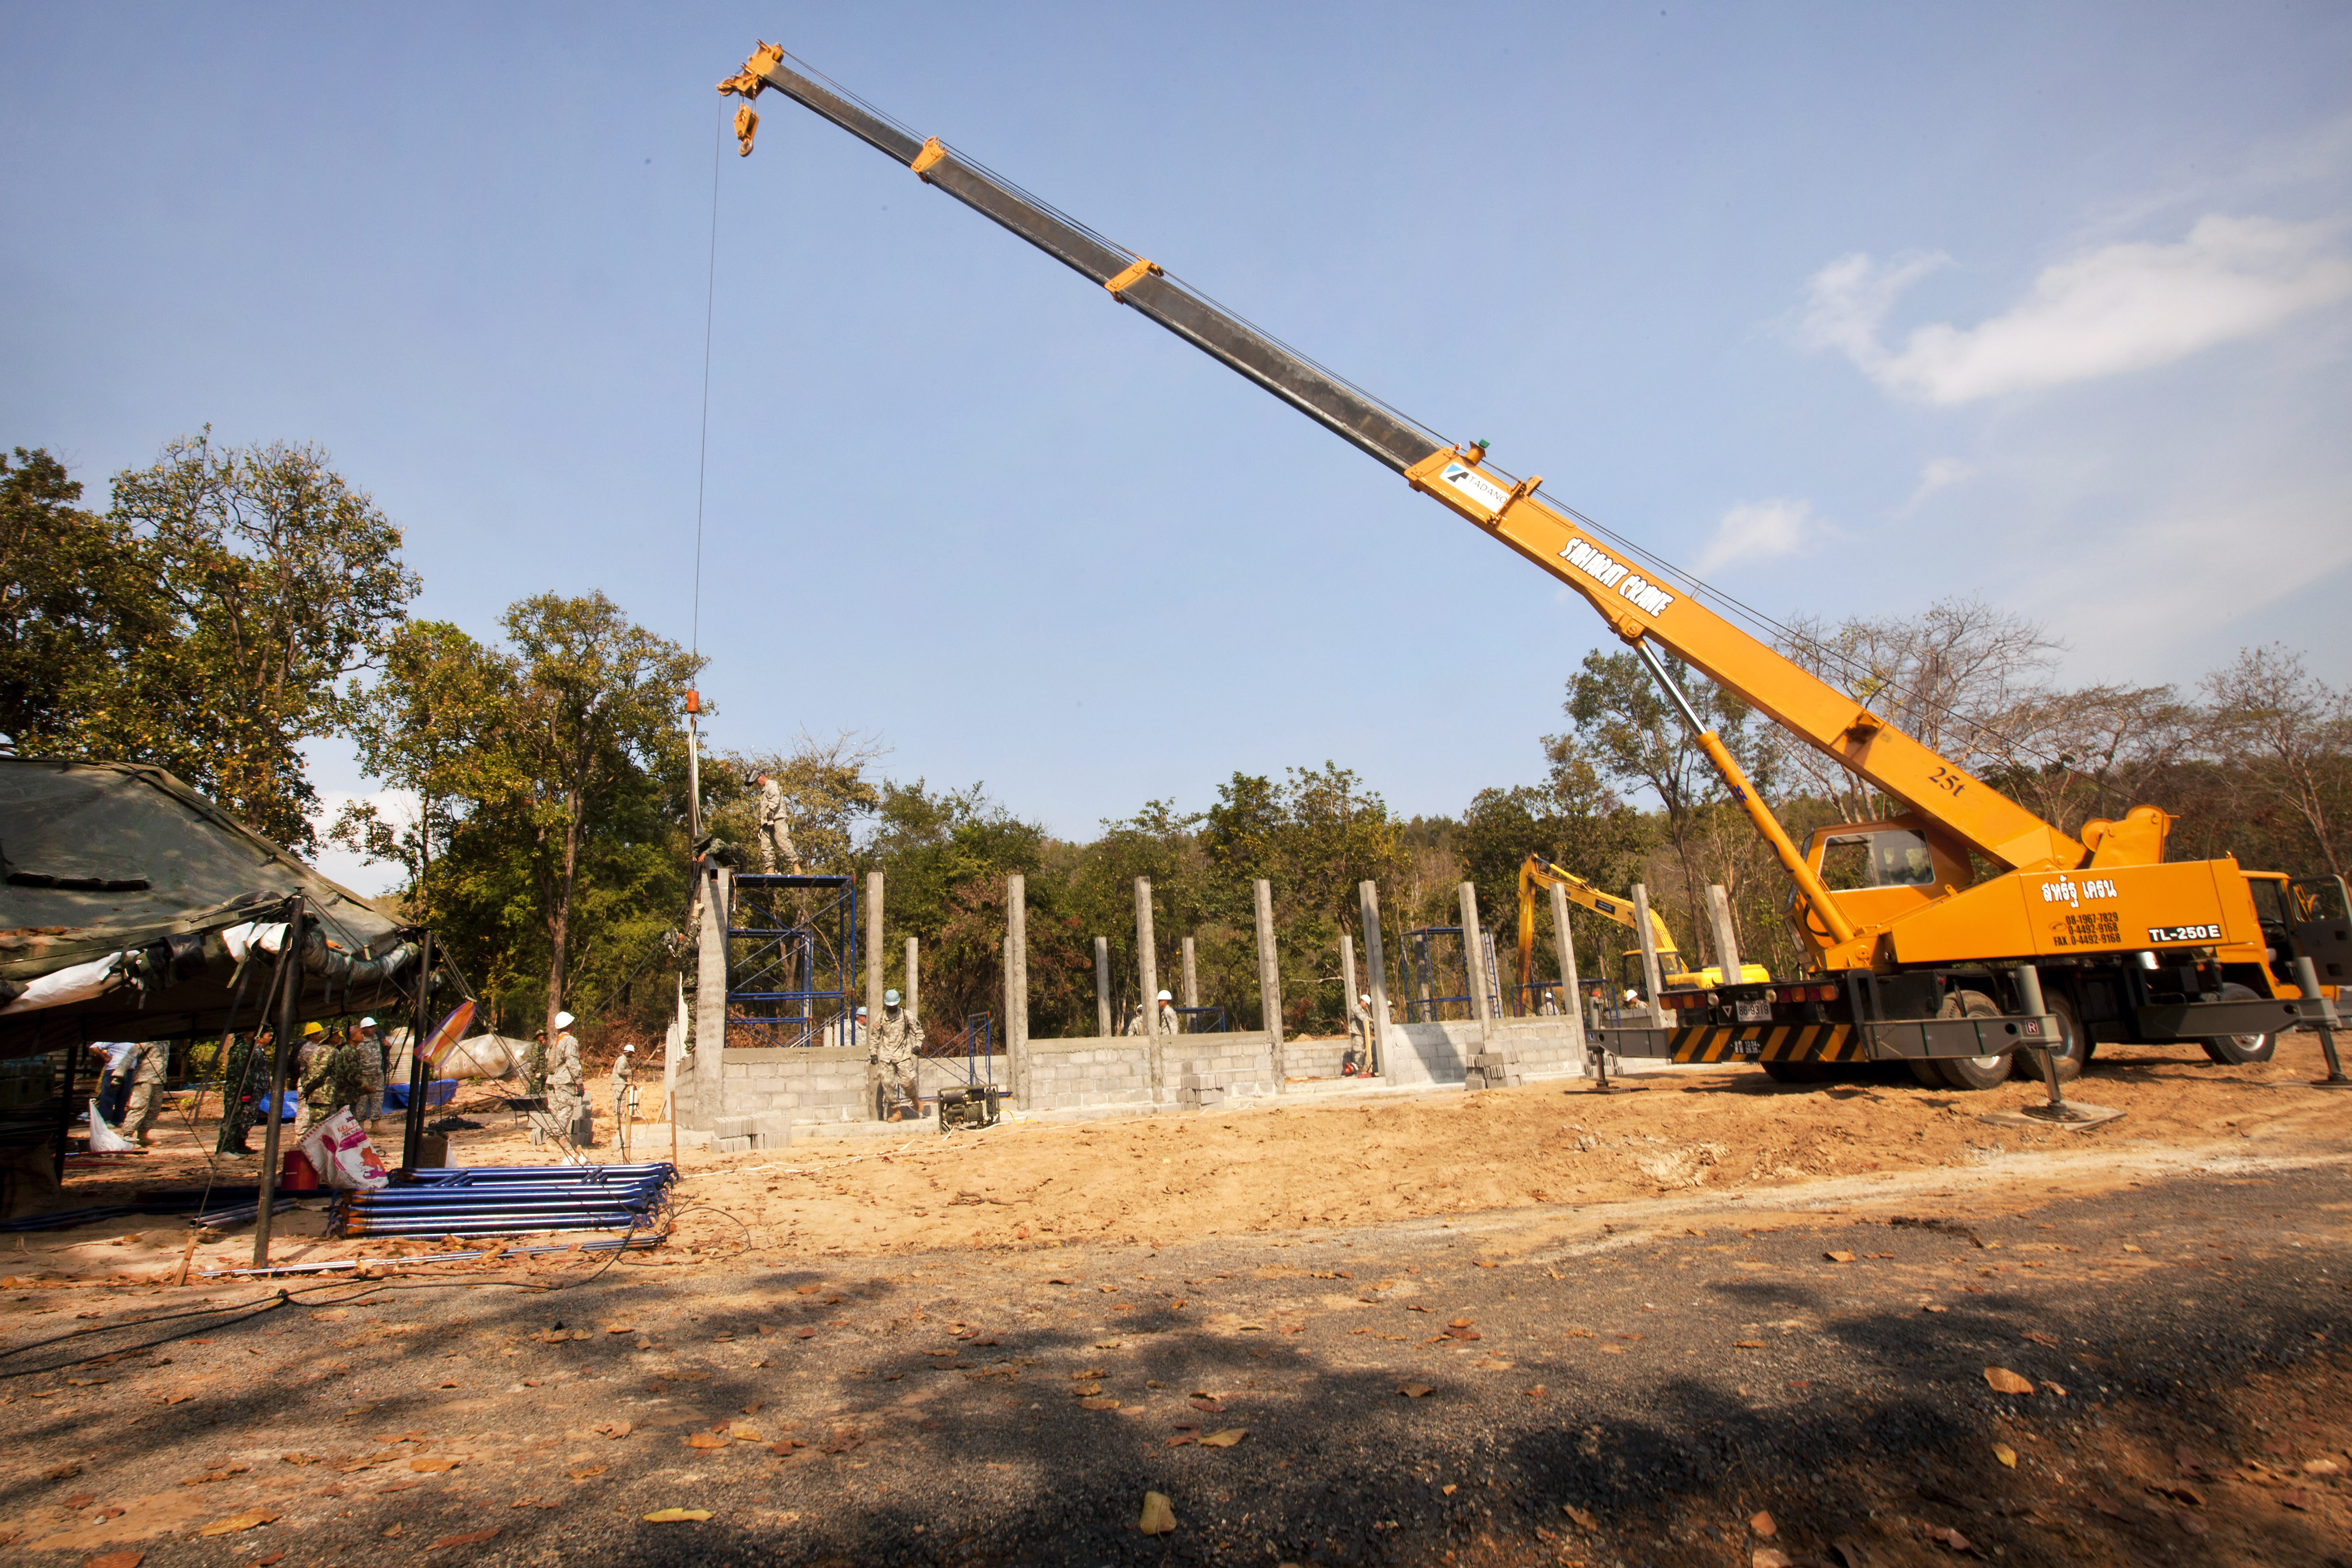 A Thai Soldier Operates A Crane To Lower A Metal Truss Onto A Multipurpose Building During